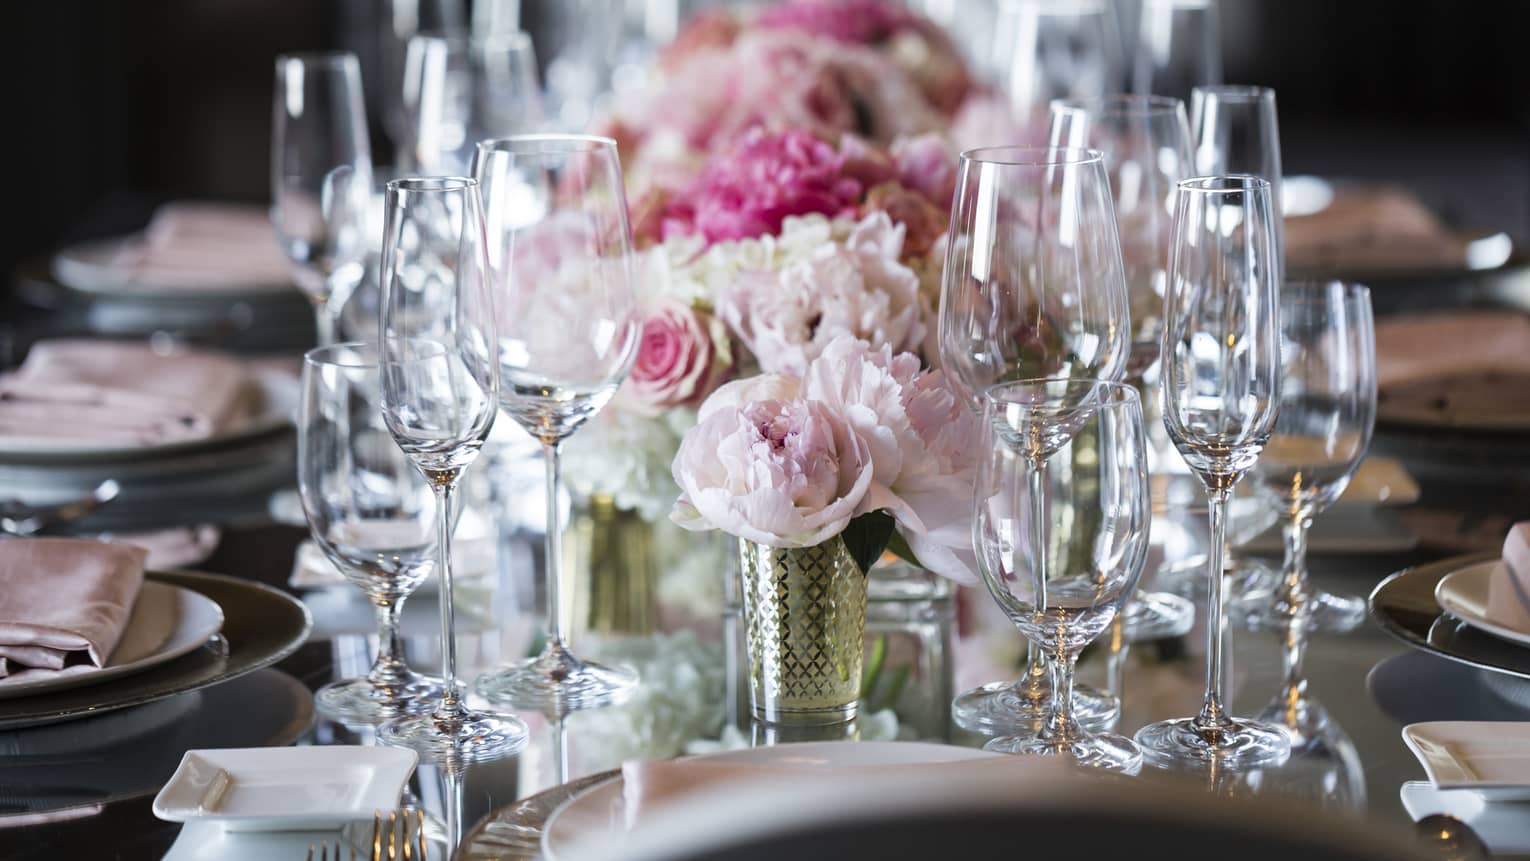 Pink roses, empty wine glasses arranged on long wedding banquet table